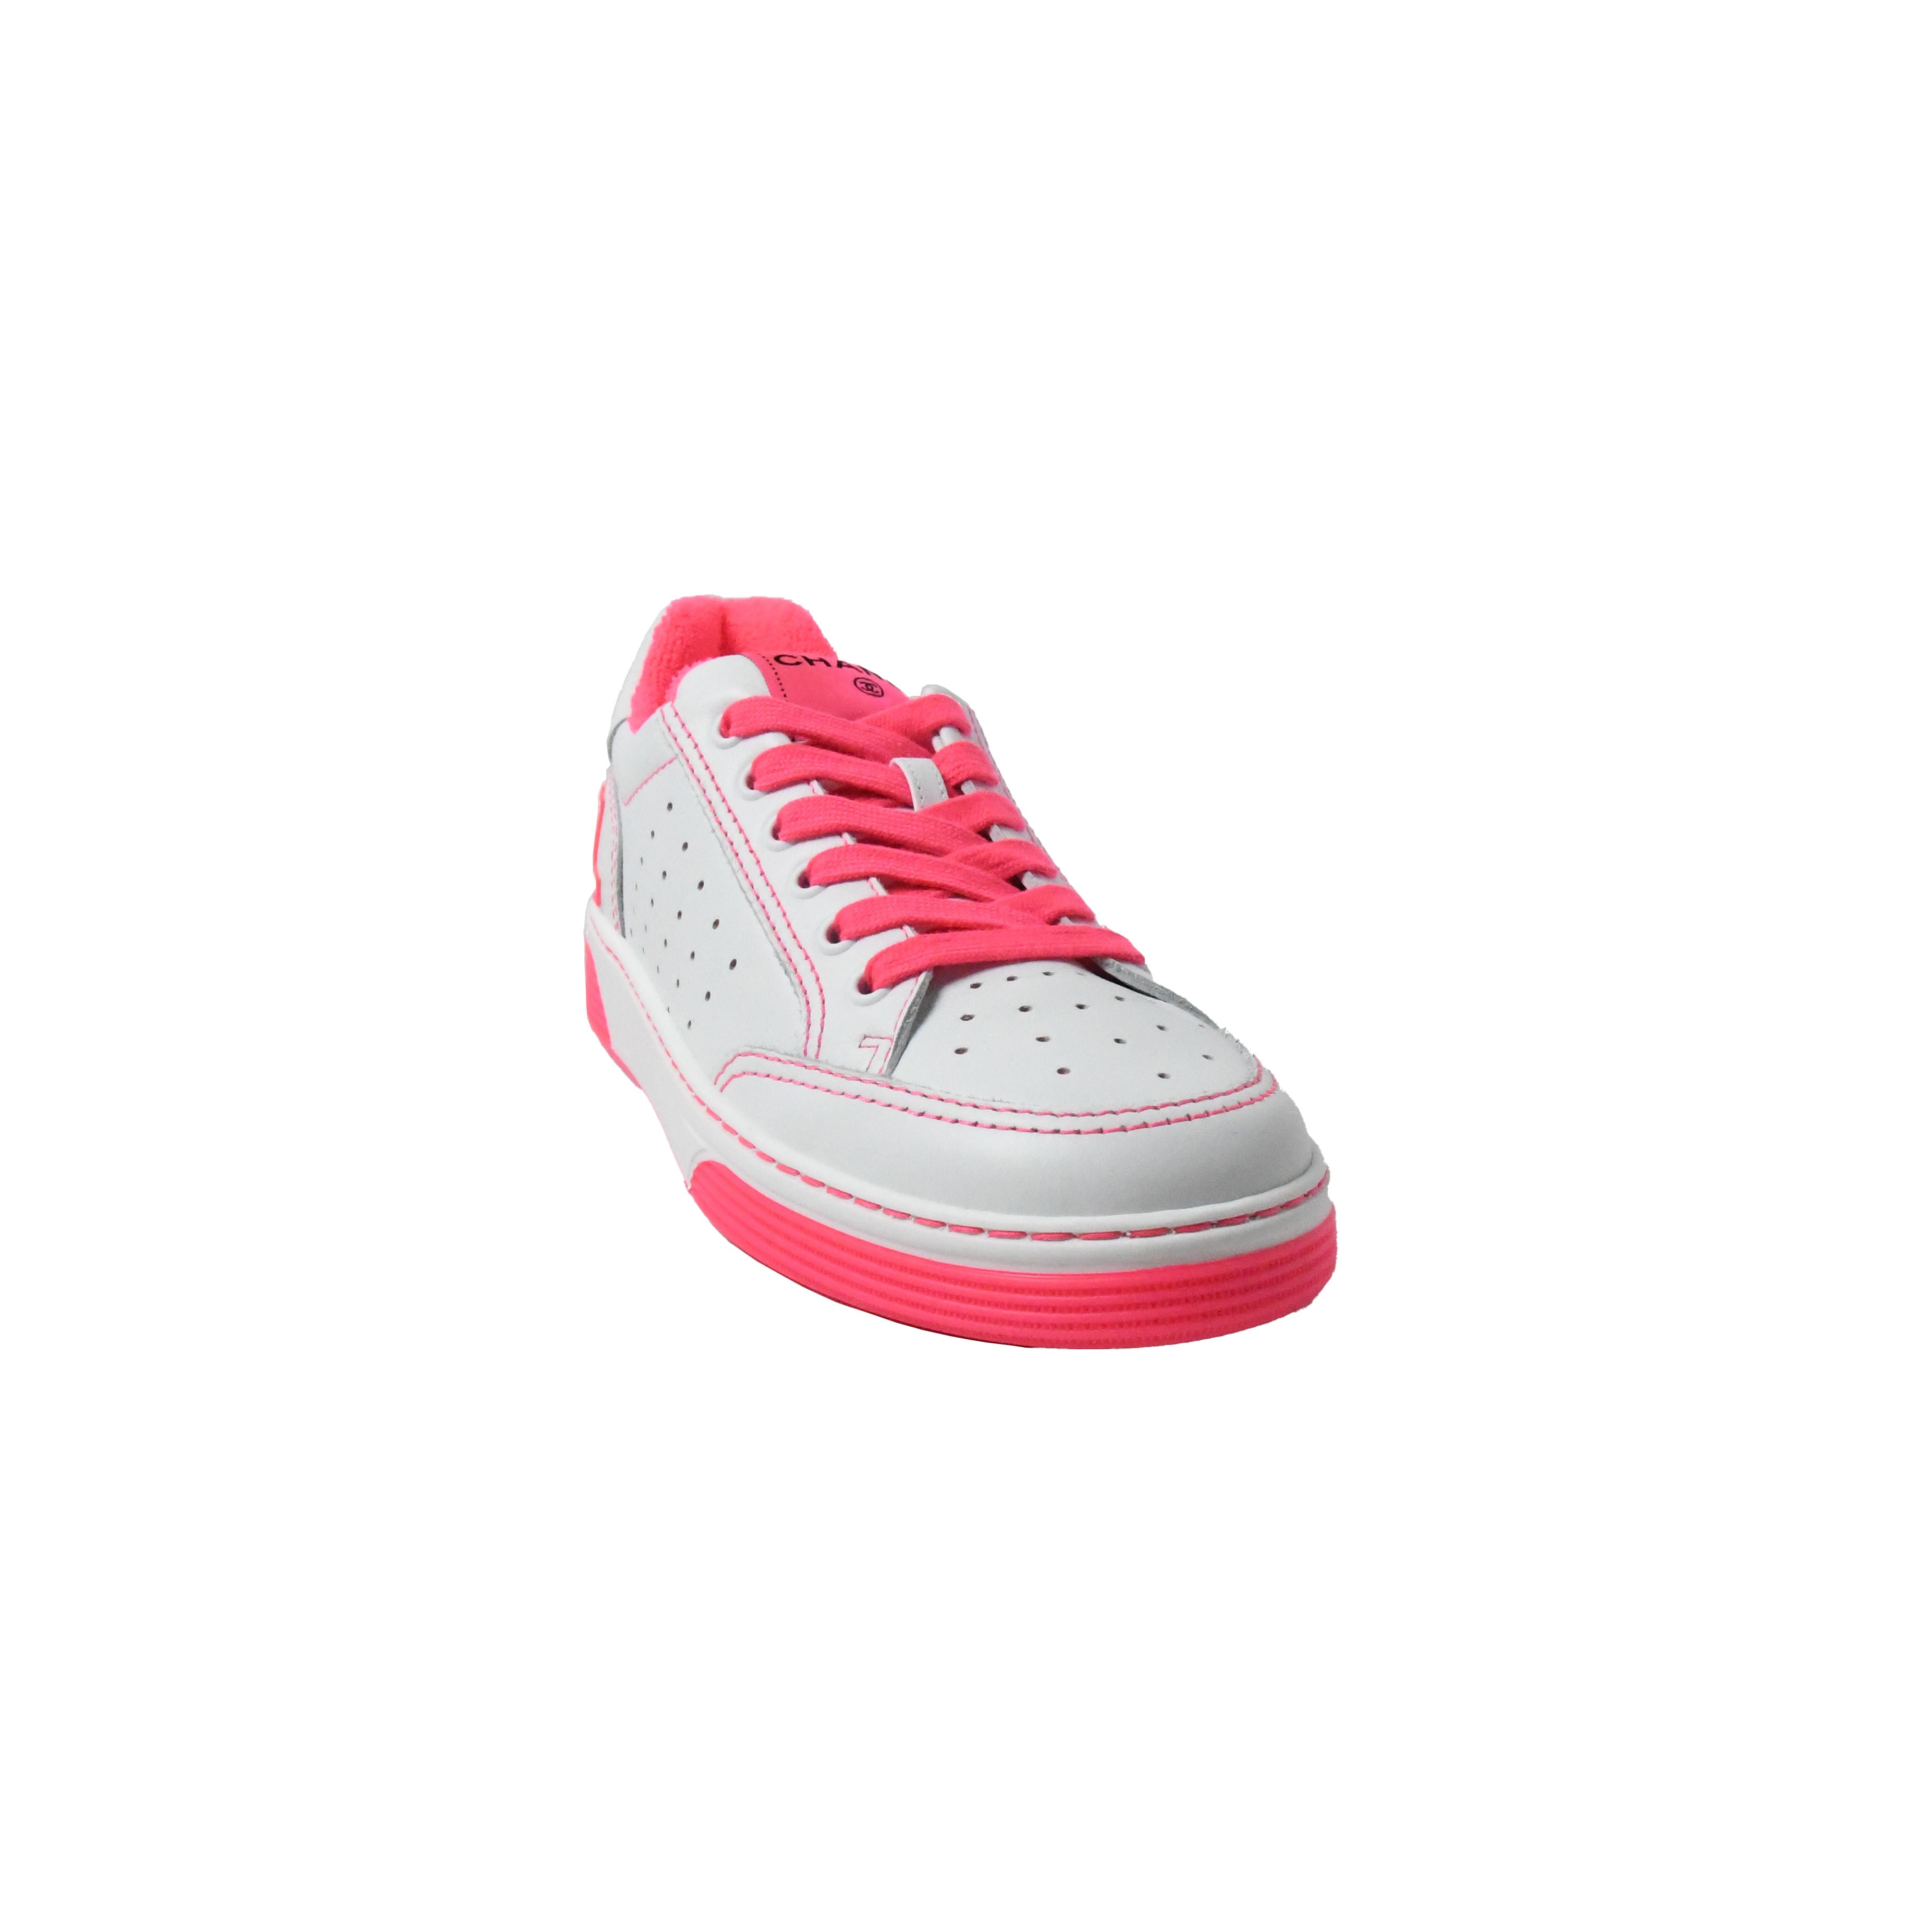 Chanel Calfskin Fabric Sneakers White/Silver/Pink - NOBLEMARS